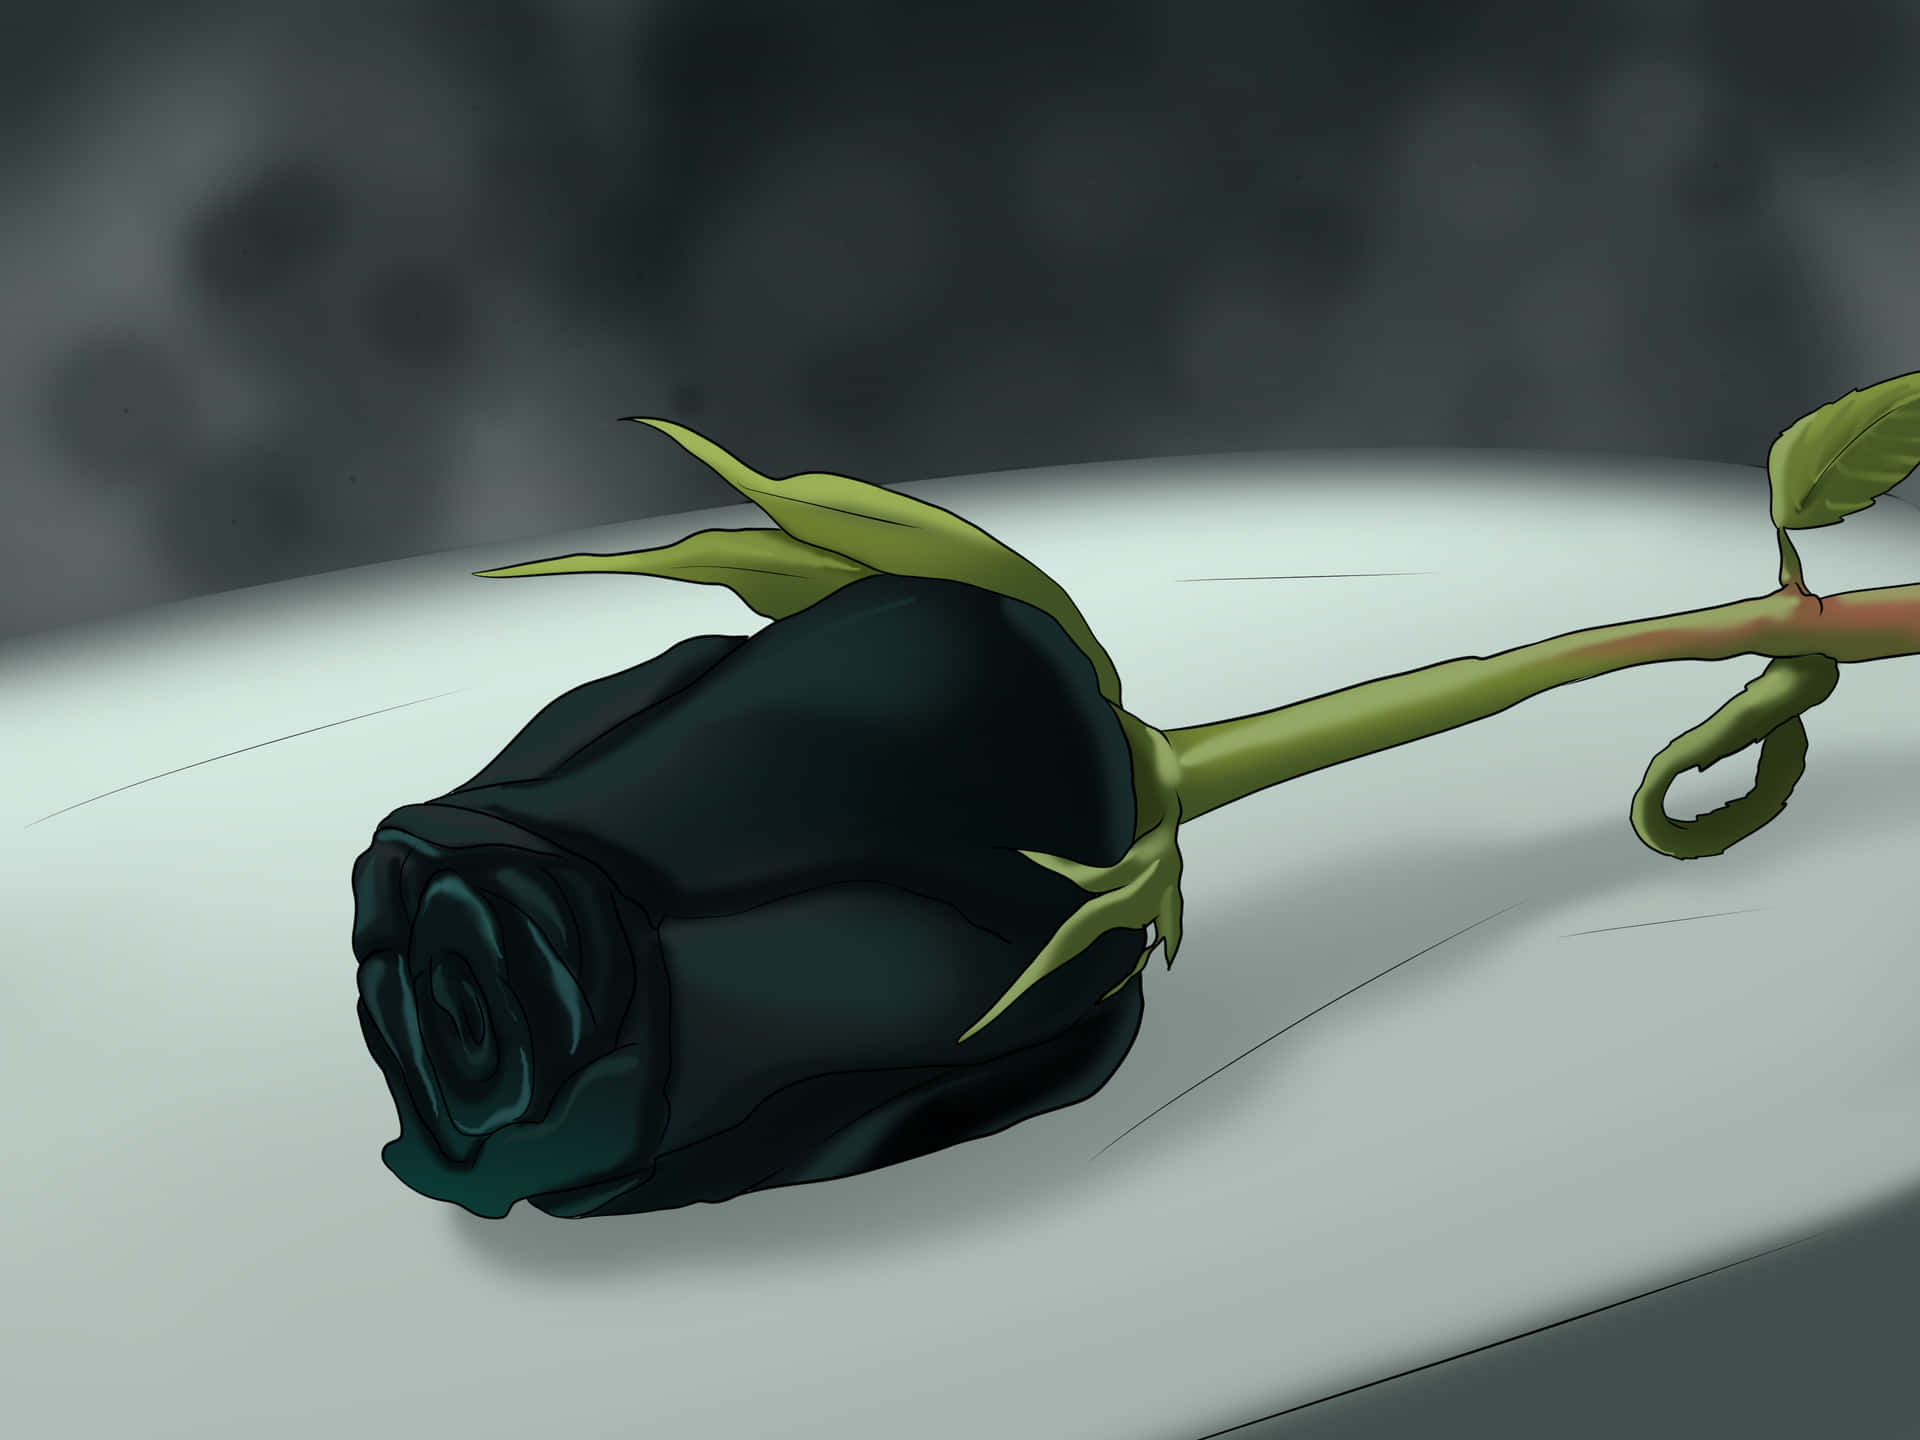 A Black Rose On A White Bed